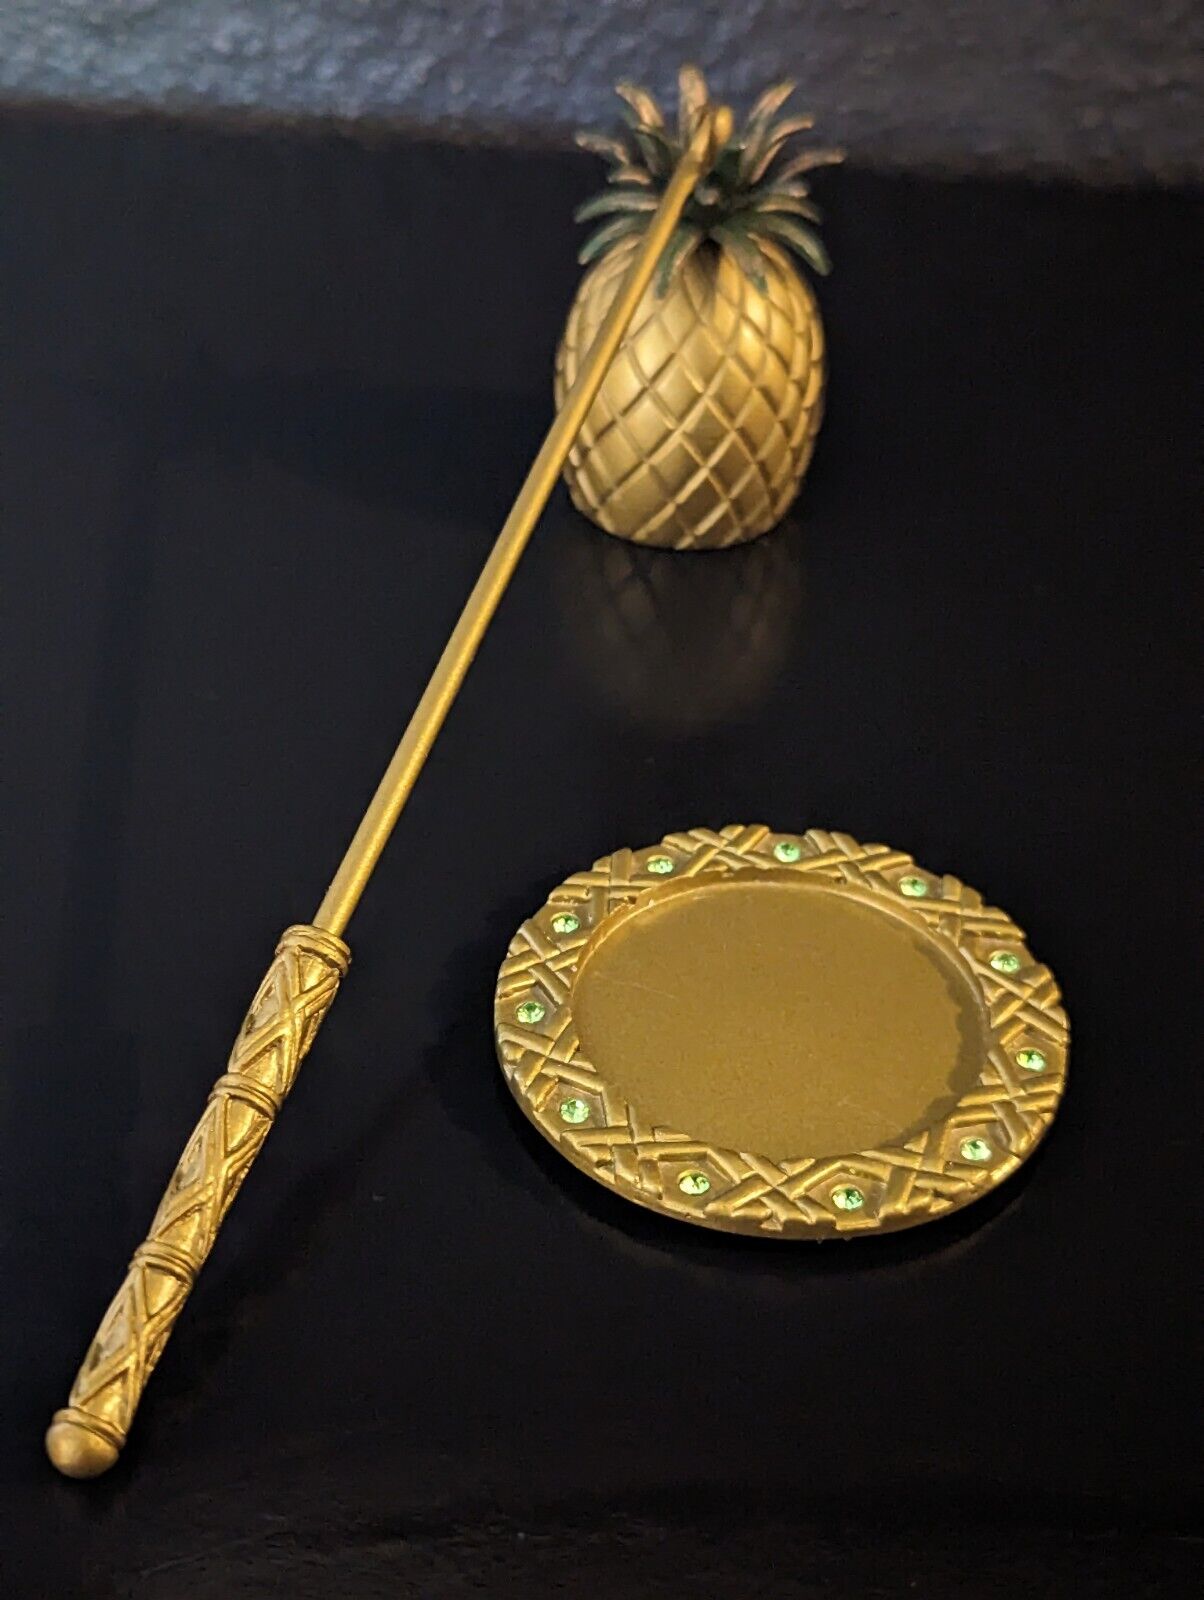 Partylite Island Escape Brass Toned Pineapple Candle Snuffer & Tray Set